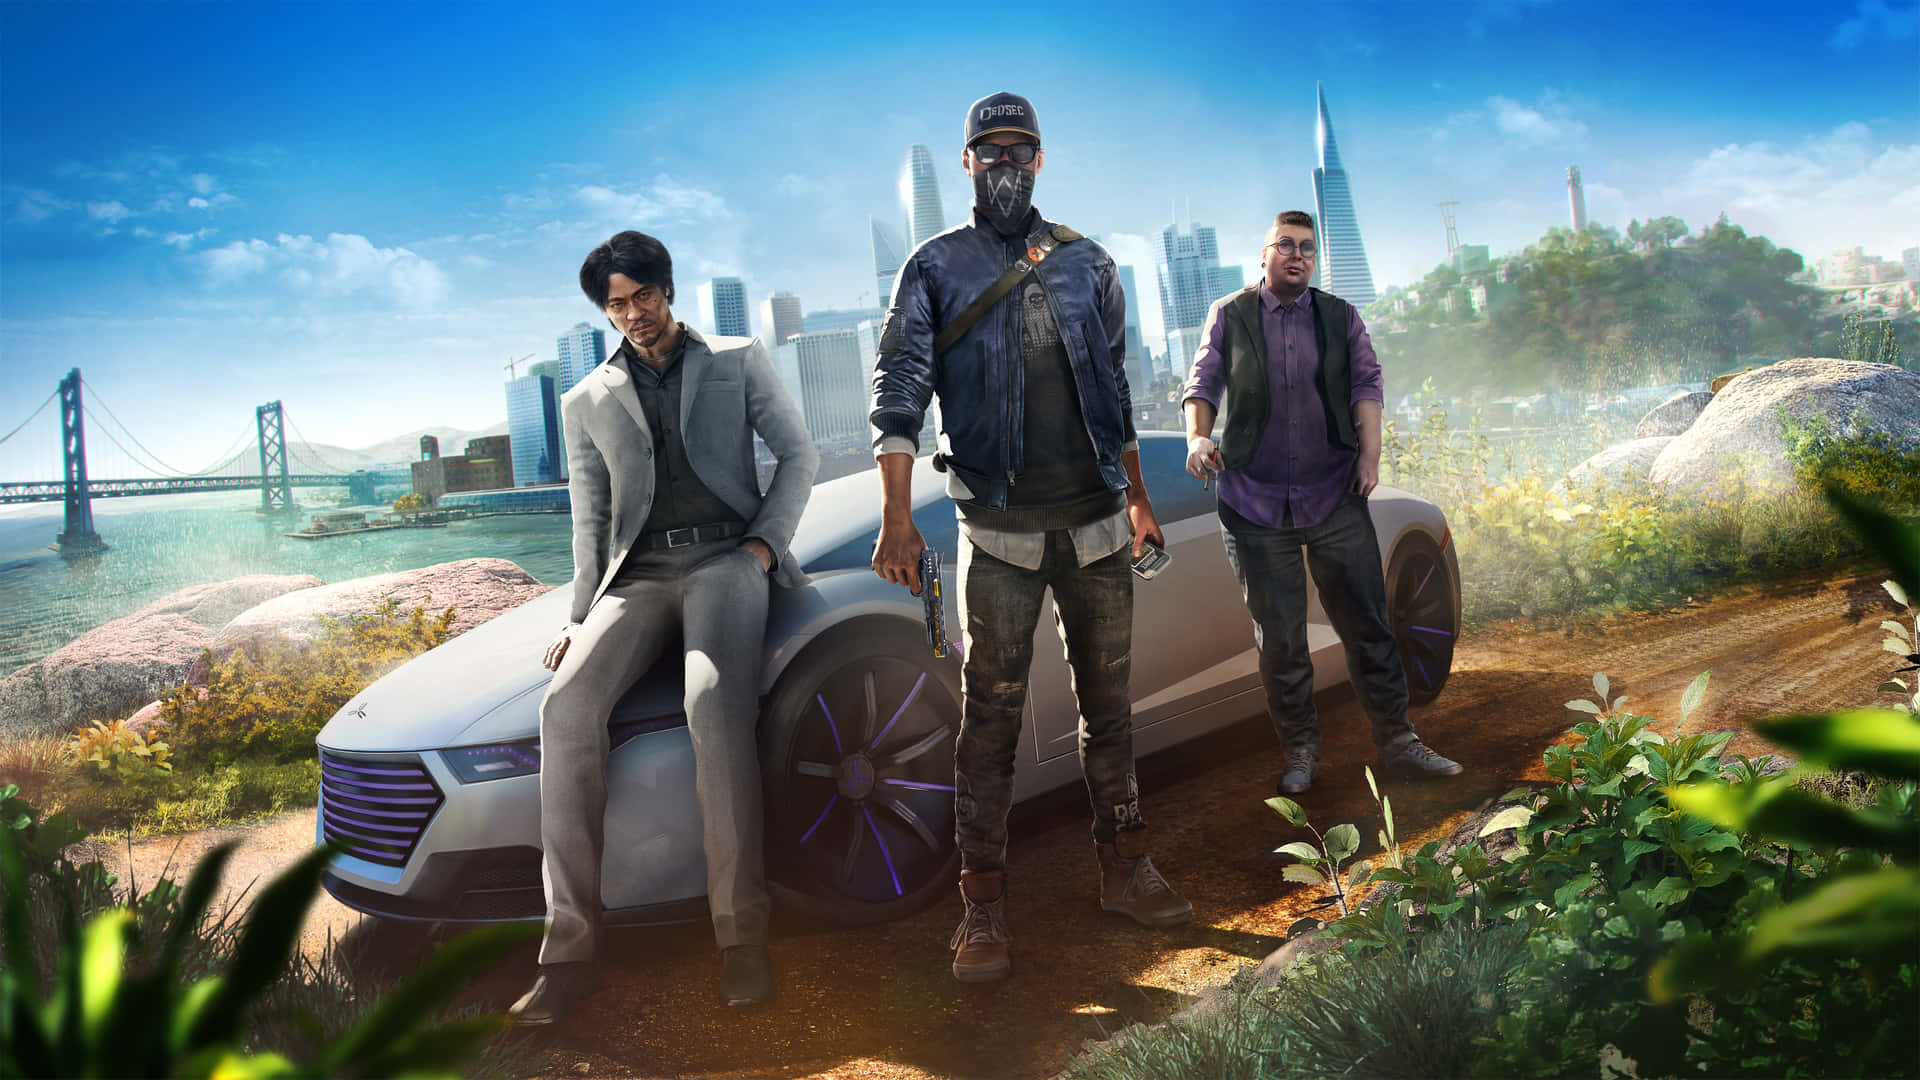 Explore the vibrant open world of Watch Dogs 2 in 4K resolution. Wallpaper